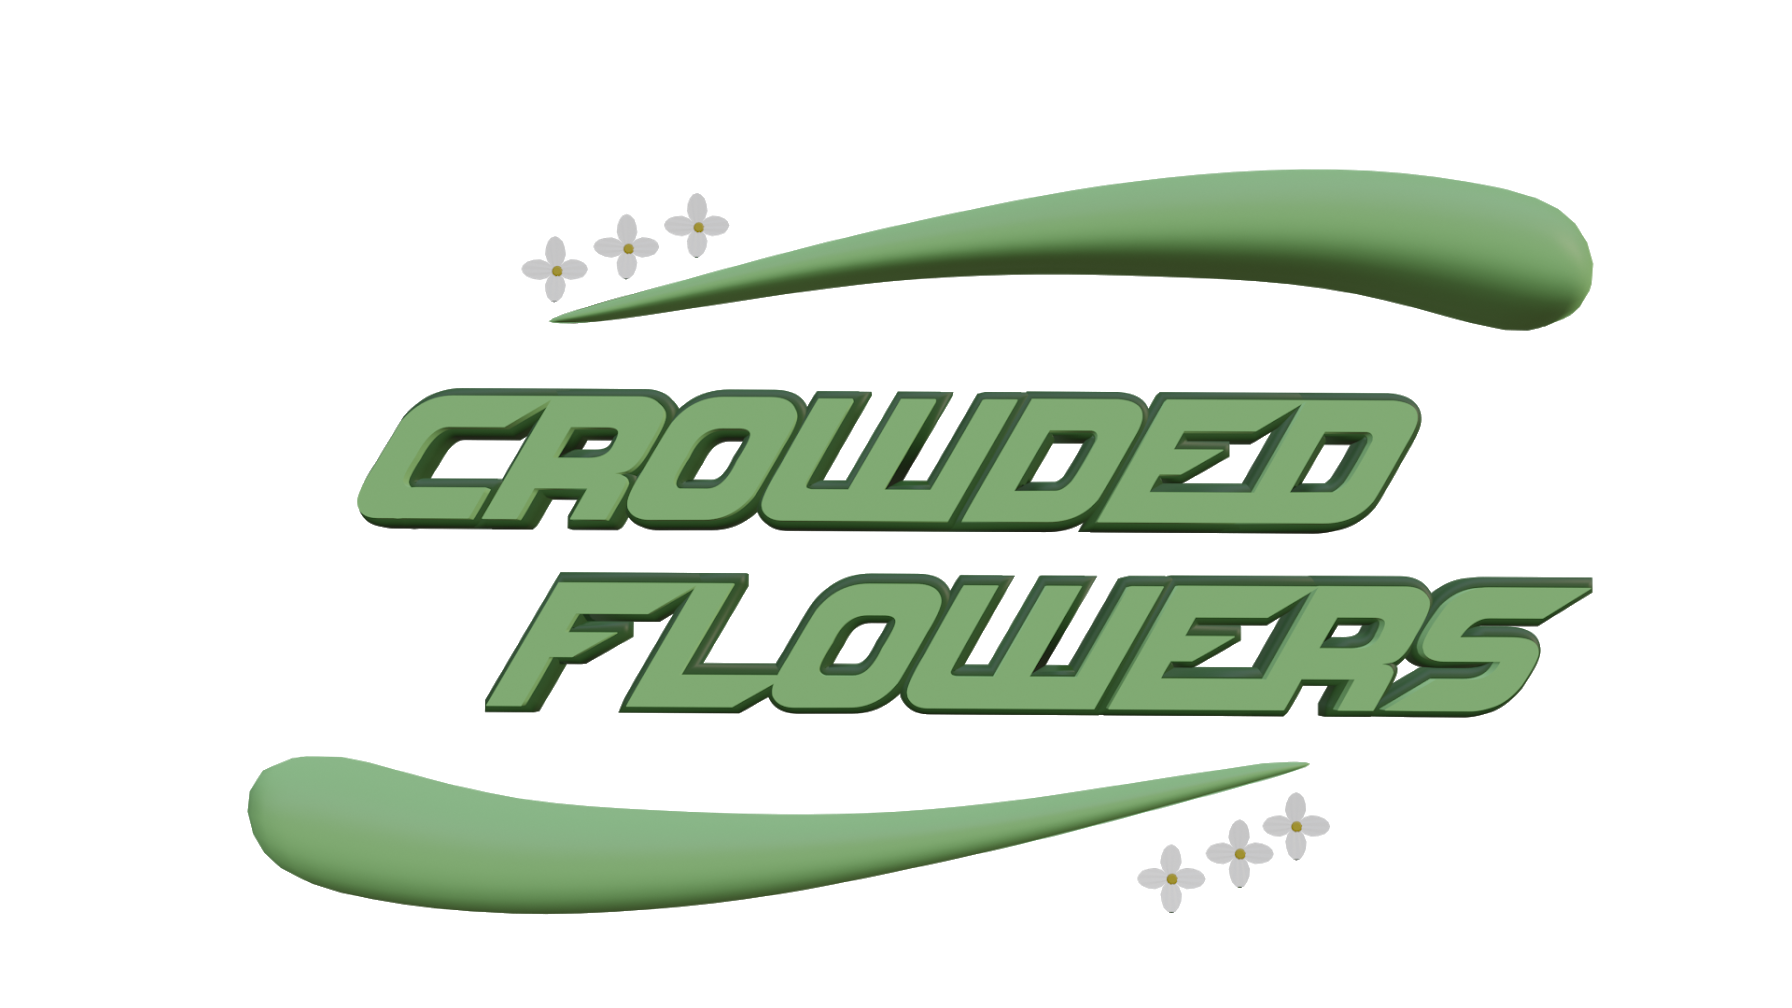 Crowded Flowers